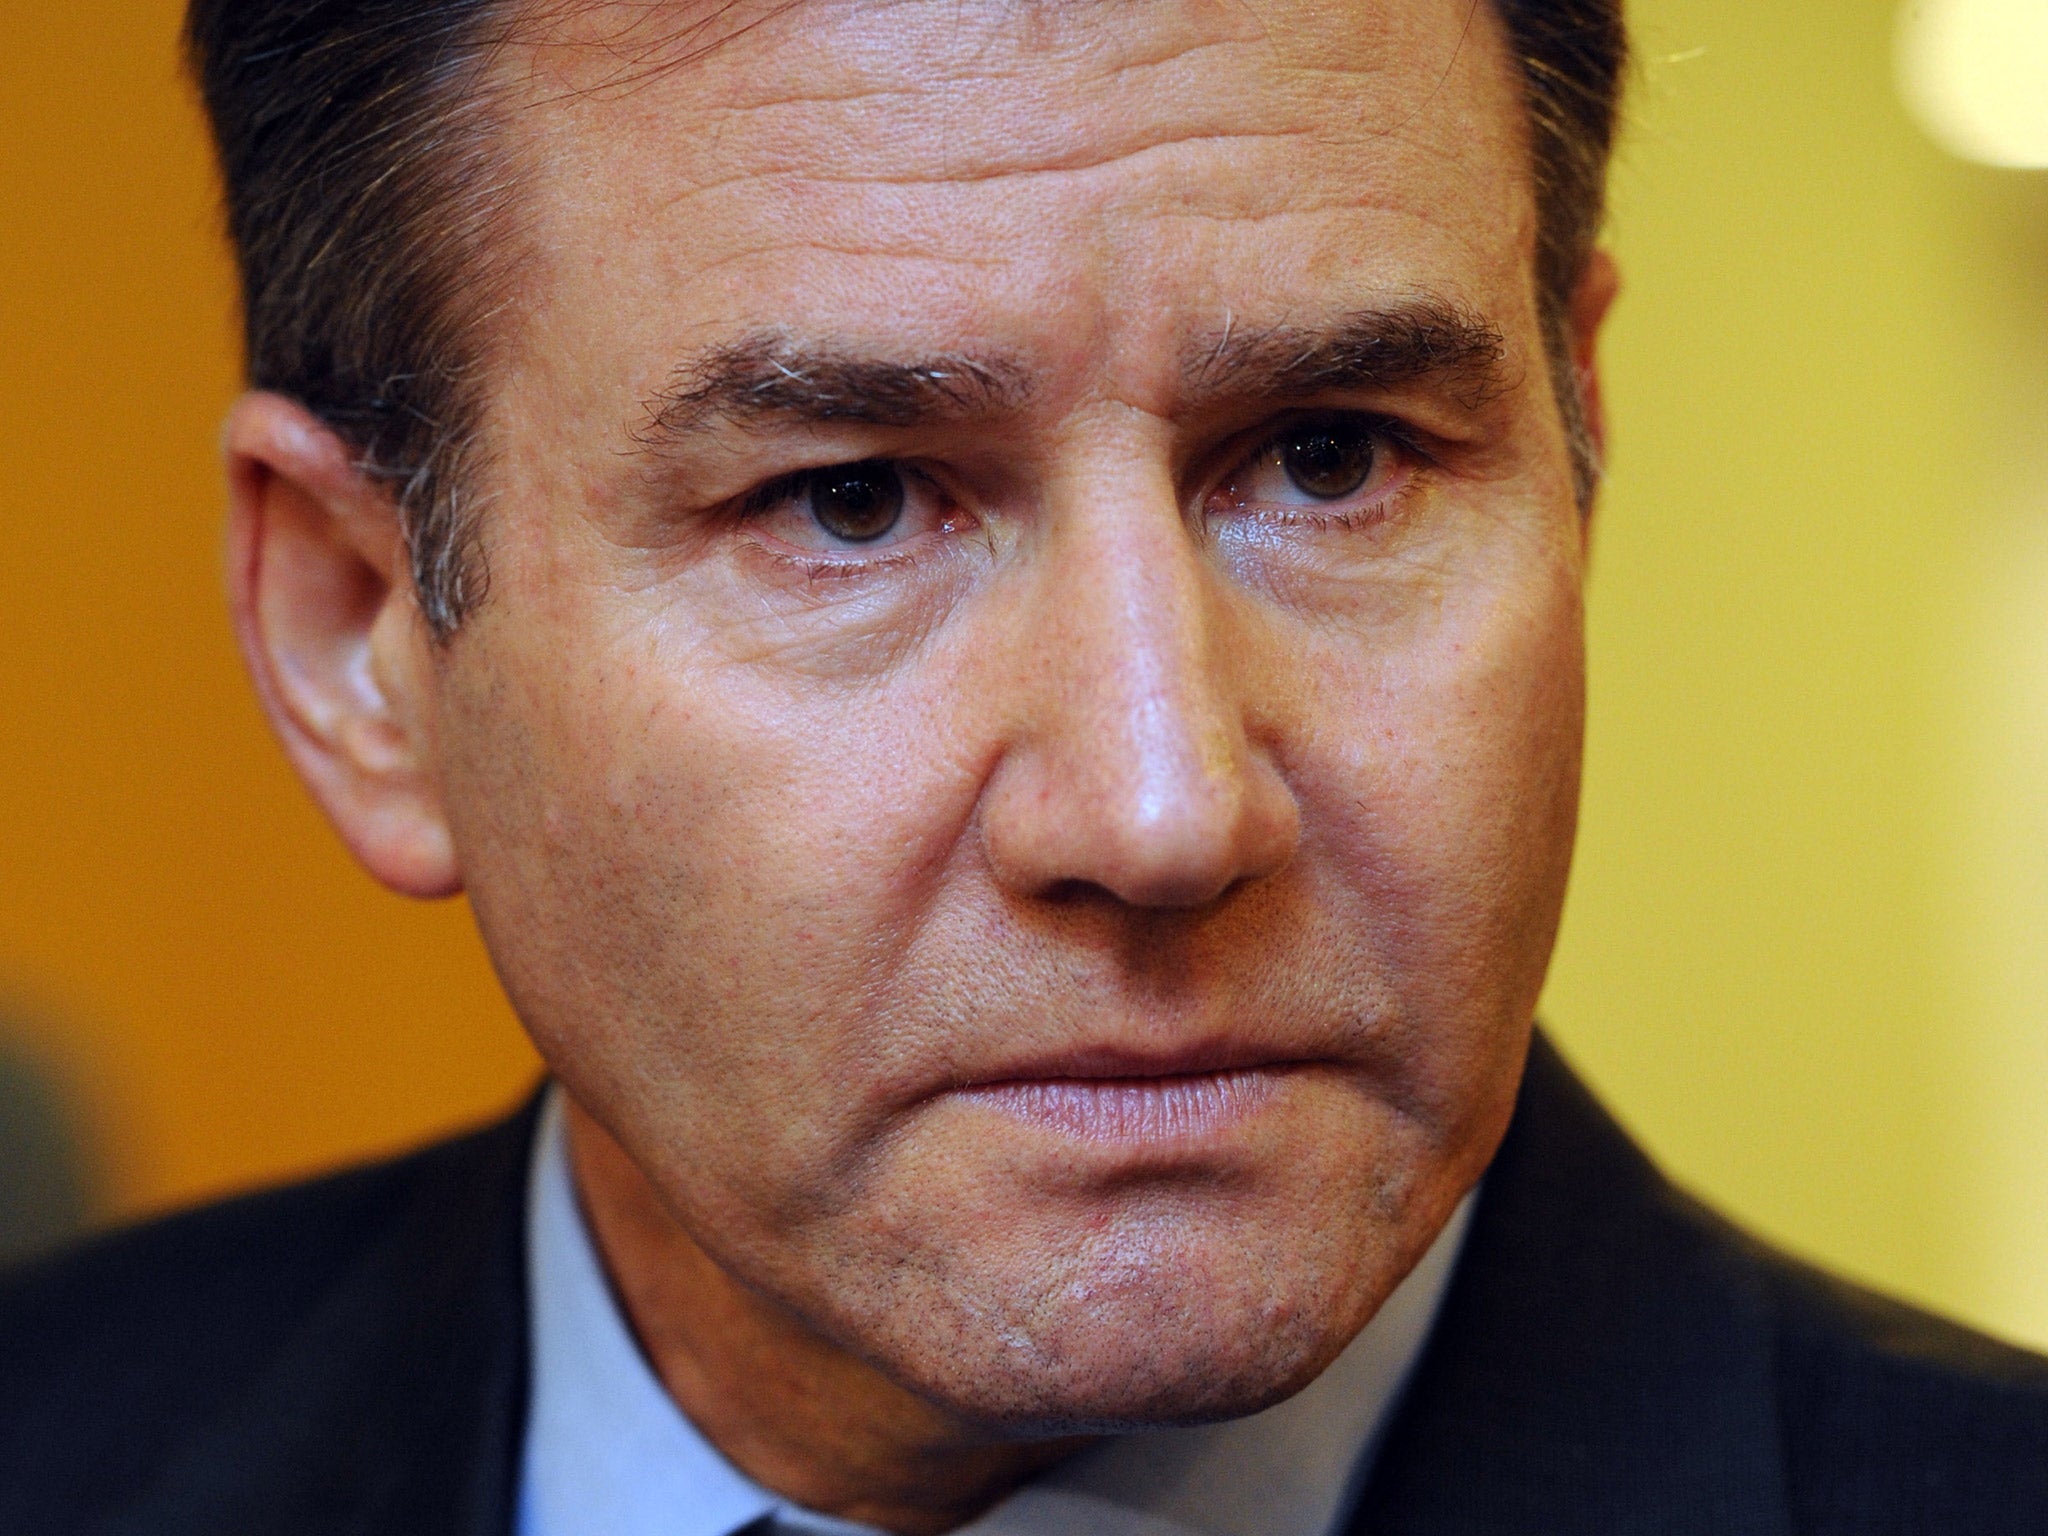 Glencore’s chief executive Ivan Glasenberg has a reputation as a trader like few others